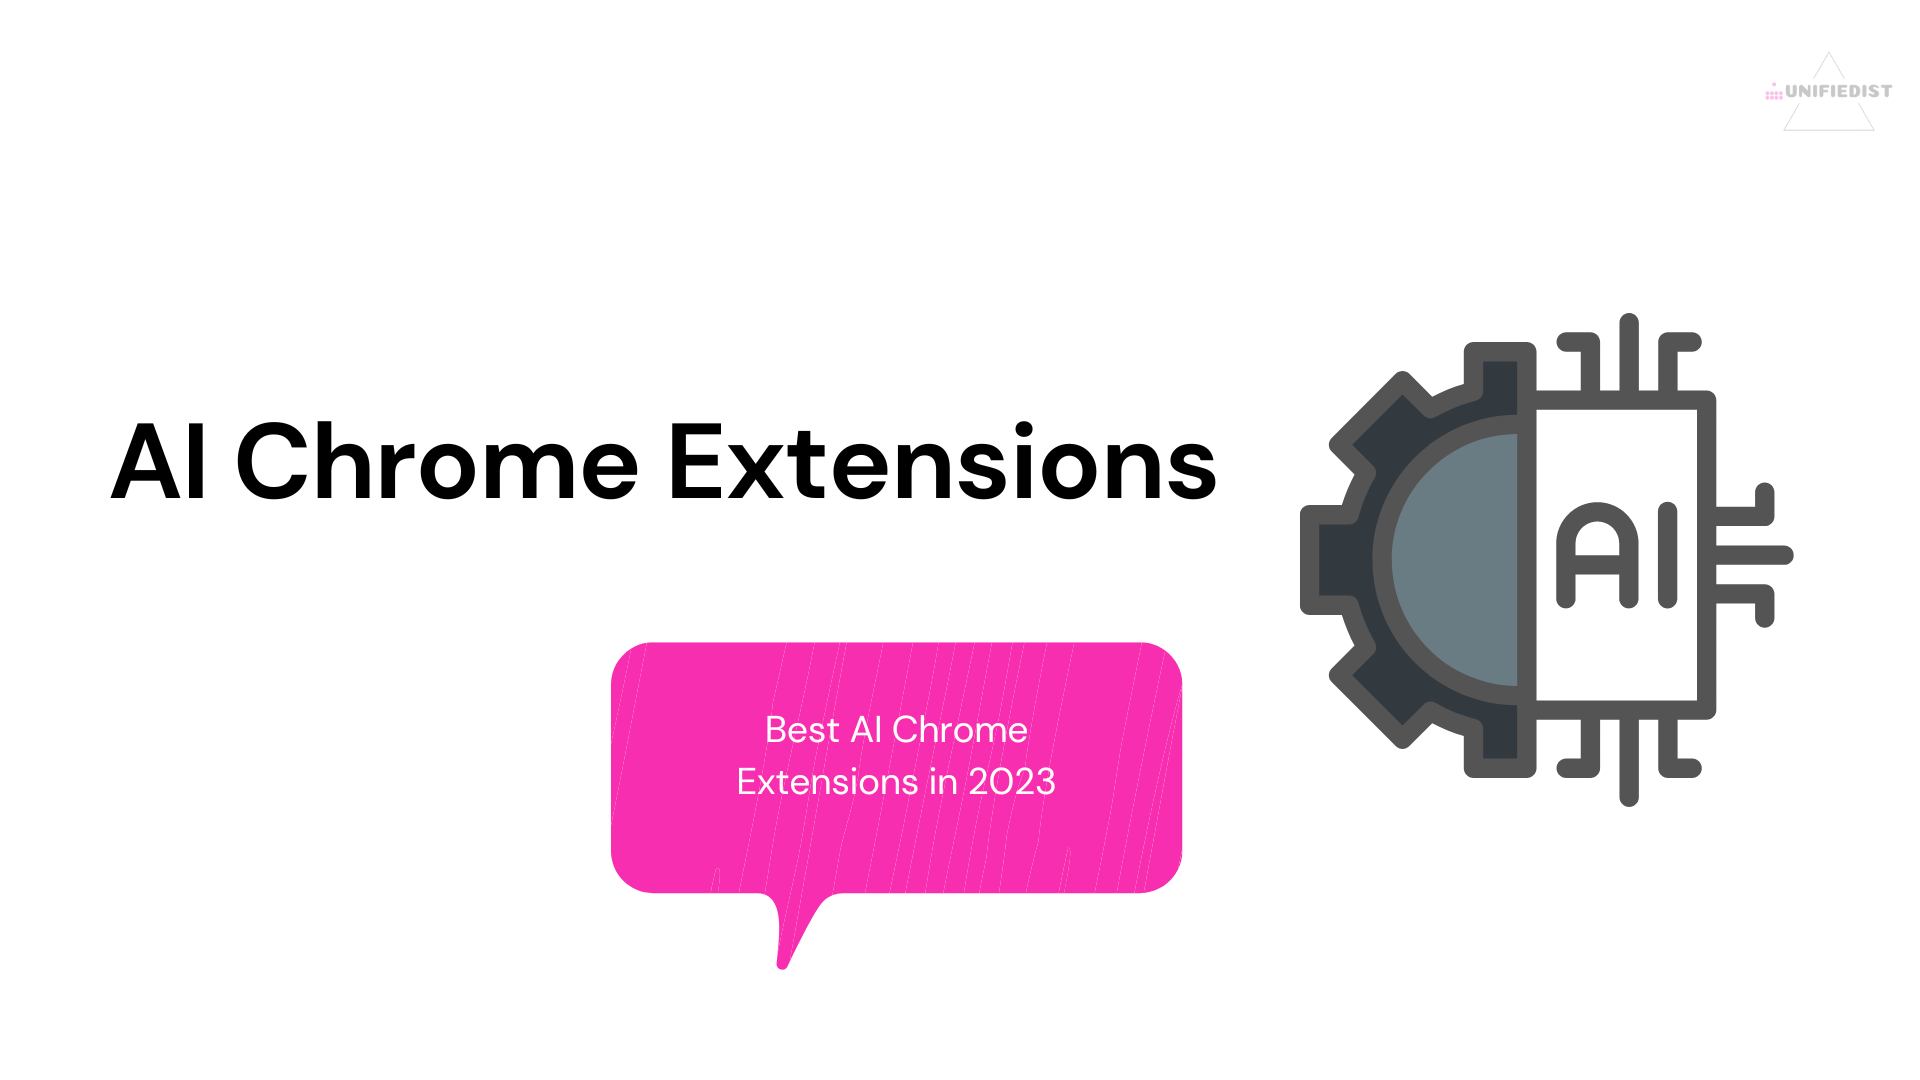 Best AI Chrome Extensions in 2023